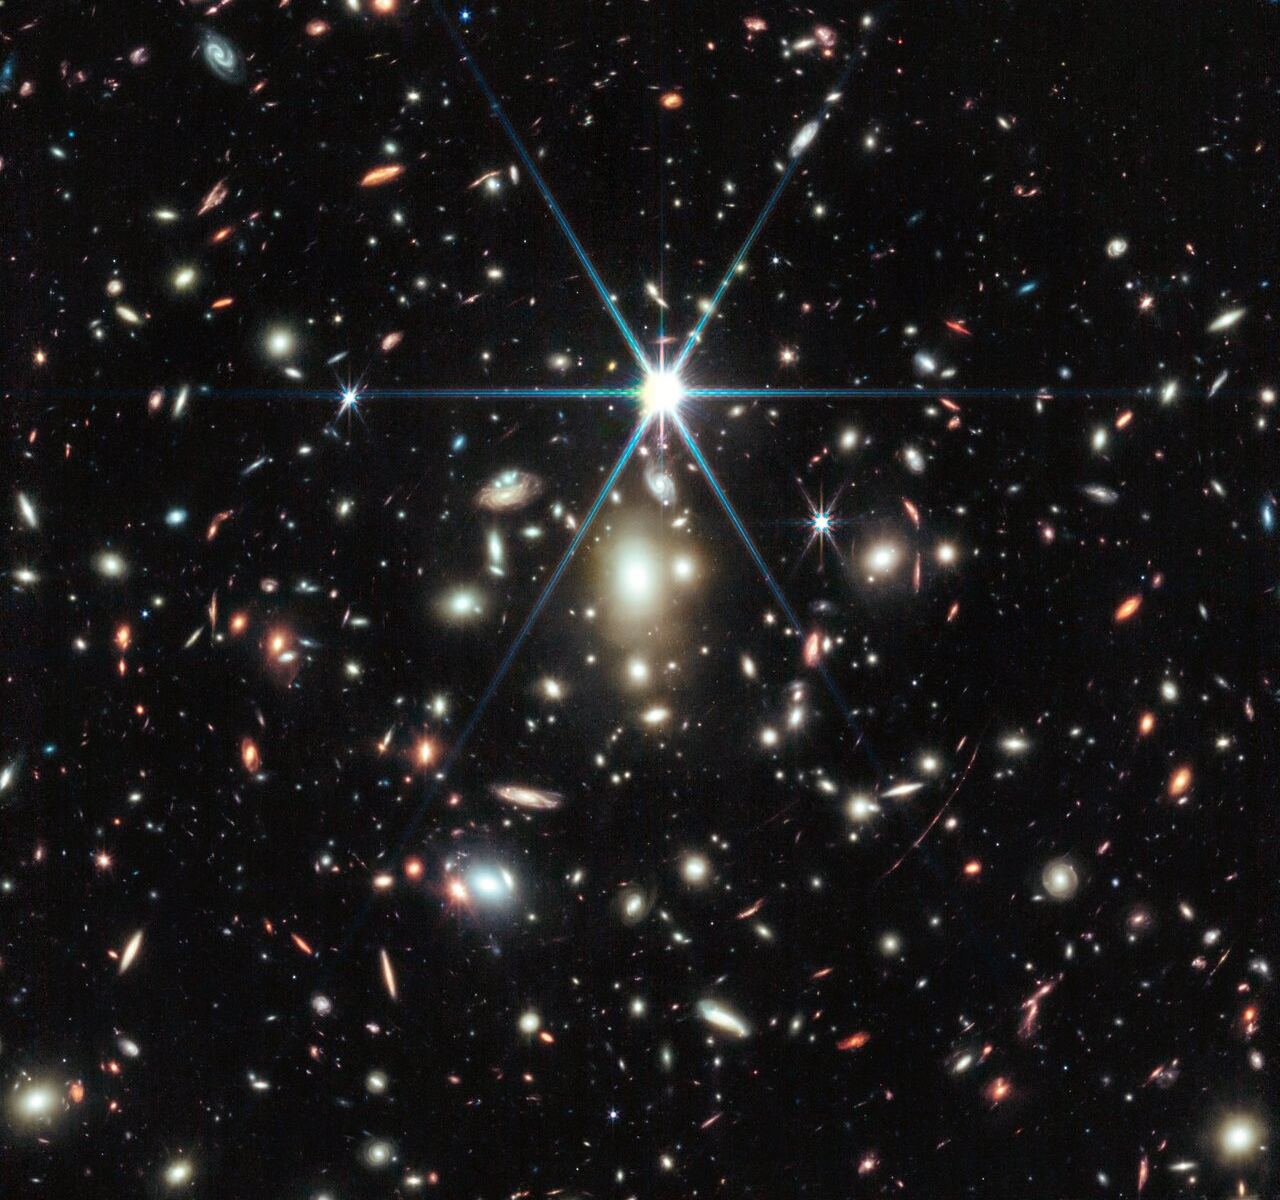 The massive galaxy cluster called WHL0137-08, which is gravitational lensing the most strongly magnified galaxy known in the Universe’s first billion years: the Sunrise Arc, and within that galaxy, the most distant star ever detected. The star is , nicknamed Earendel. NASA, ESA, CSA, D. Coe (AURA/STScI for ESA), Z. Levay